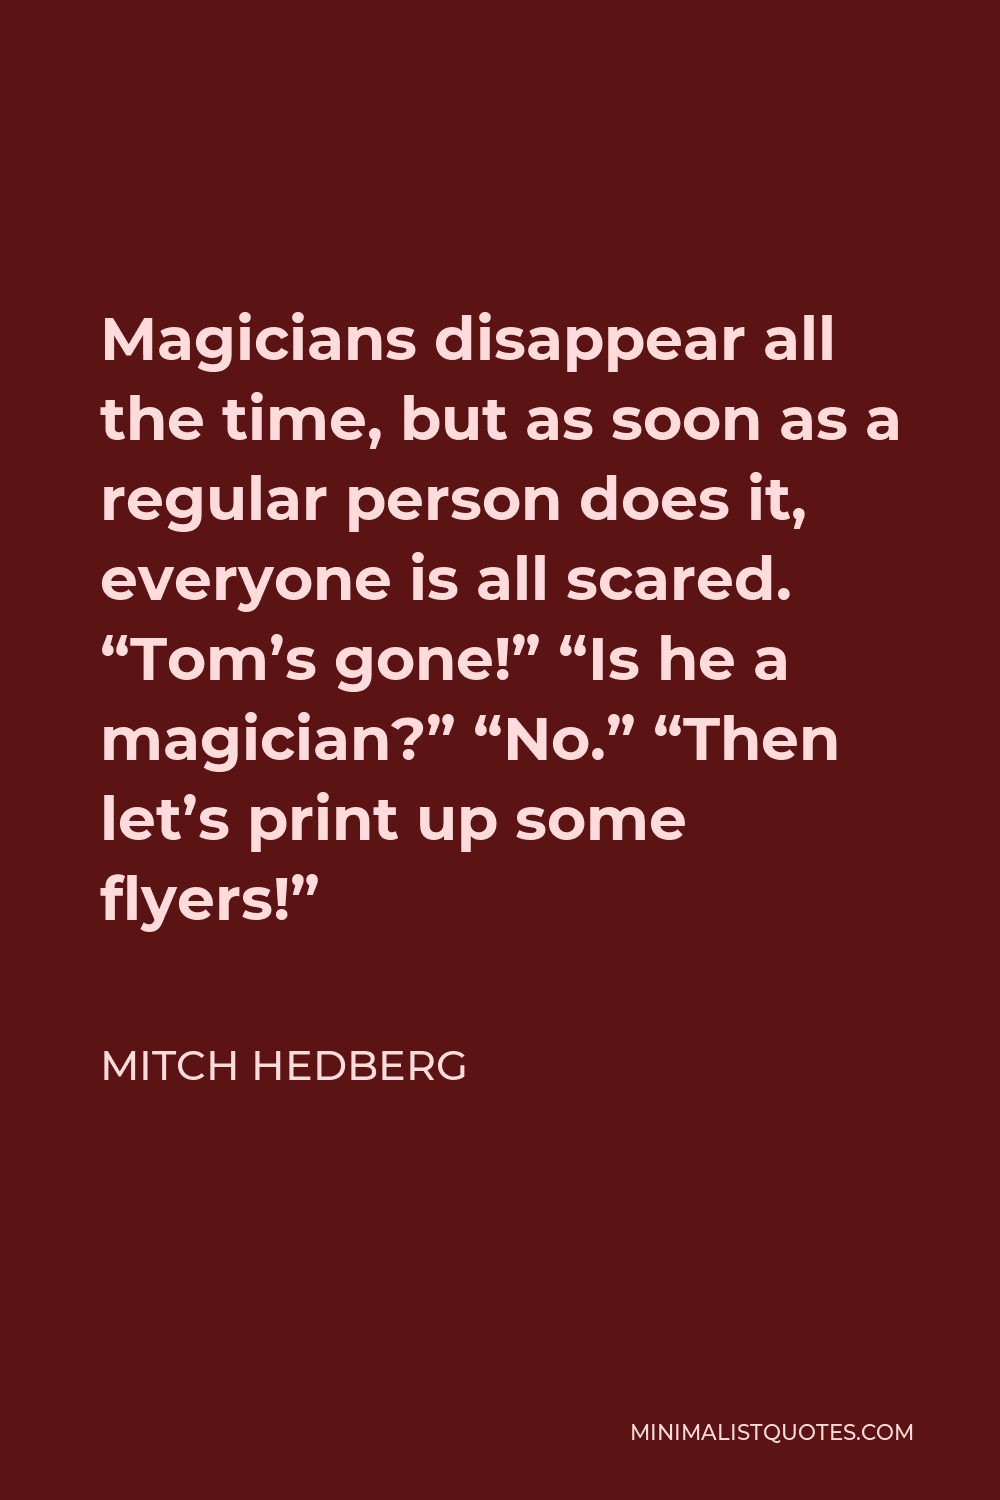 Mitch Hedberg Quote - Magicians disappear all the time, but as soon as a regular person does it, everyone is all scared. “Tom’s gone!” “Is he a magician?” “No.” “Then let’s print up some flyers!”